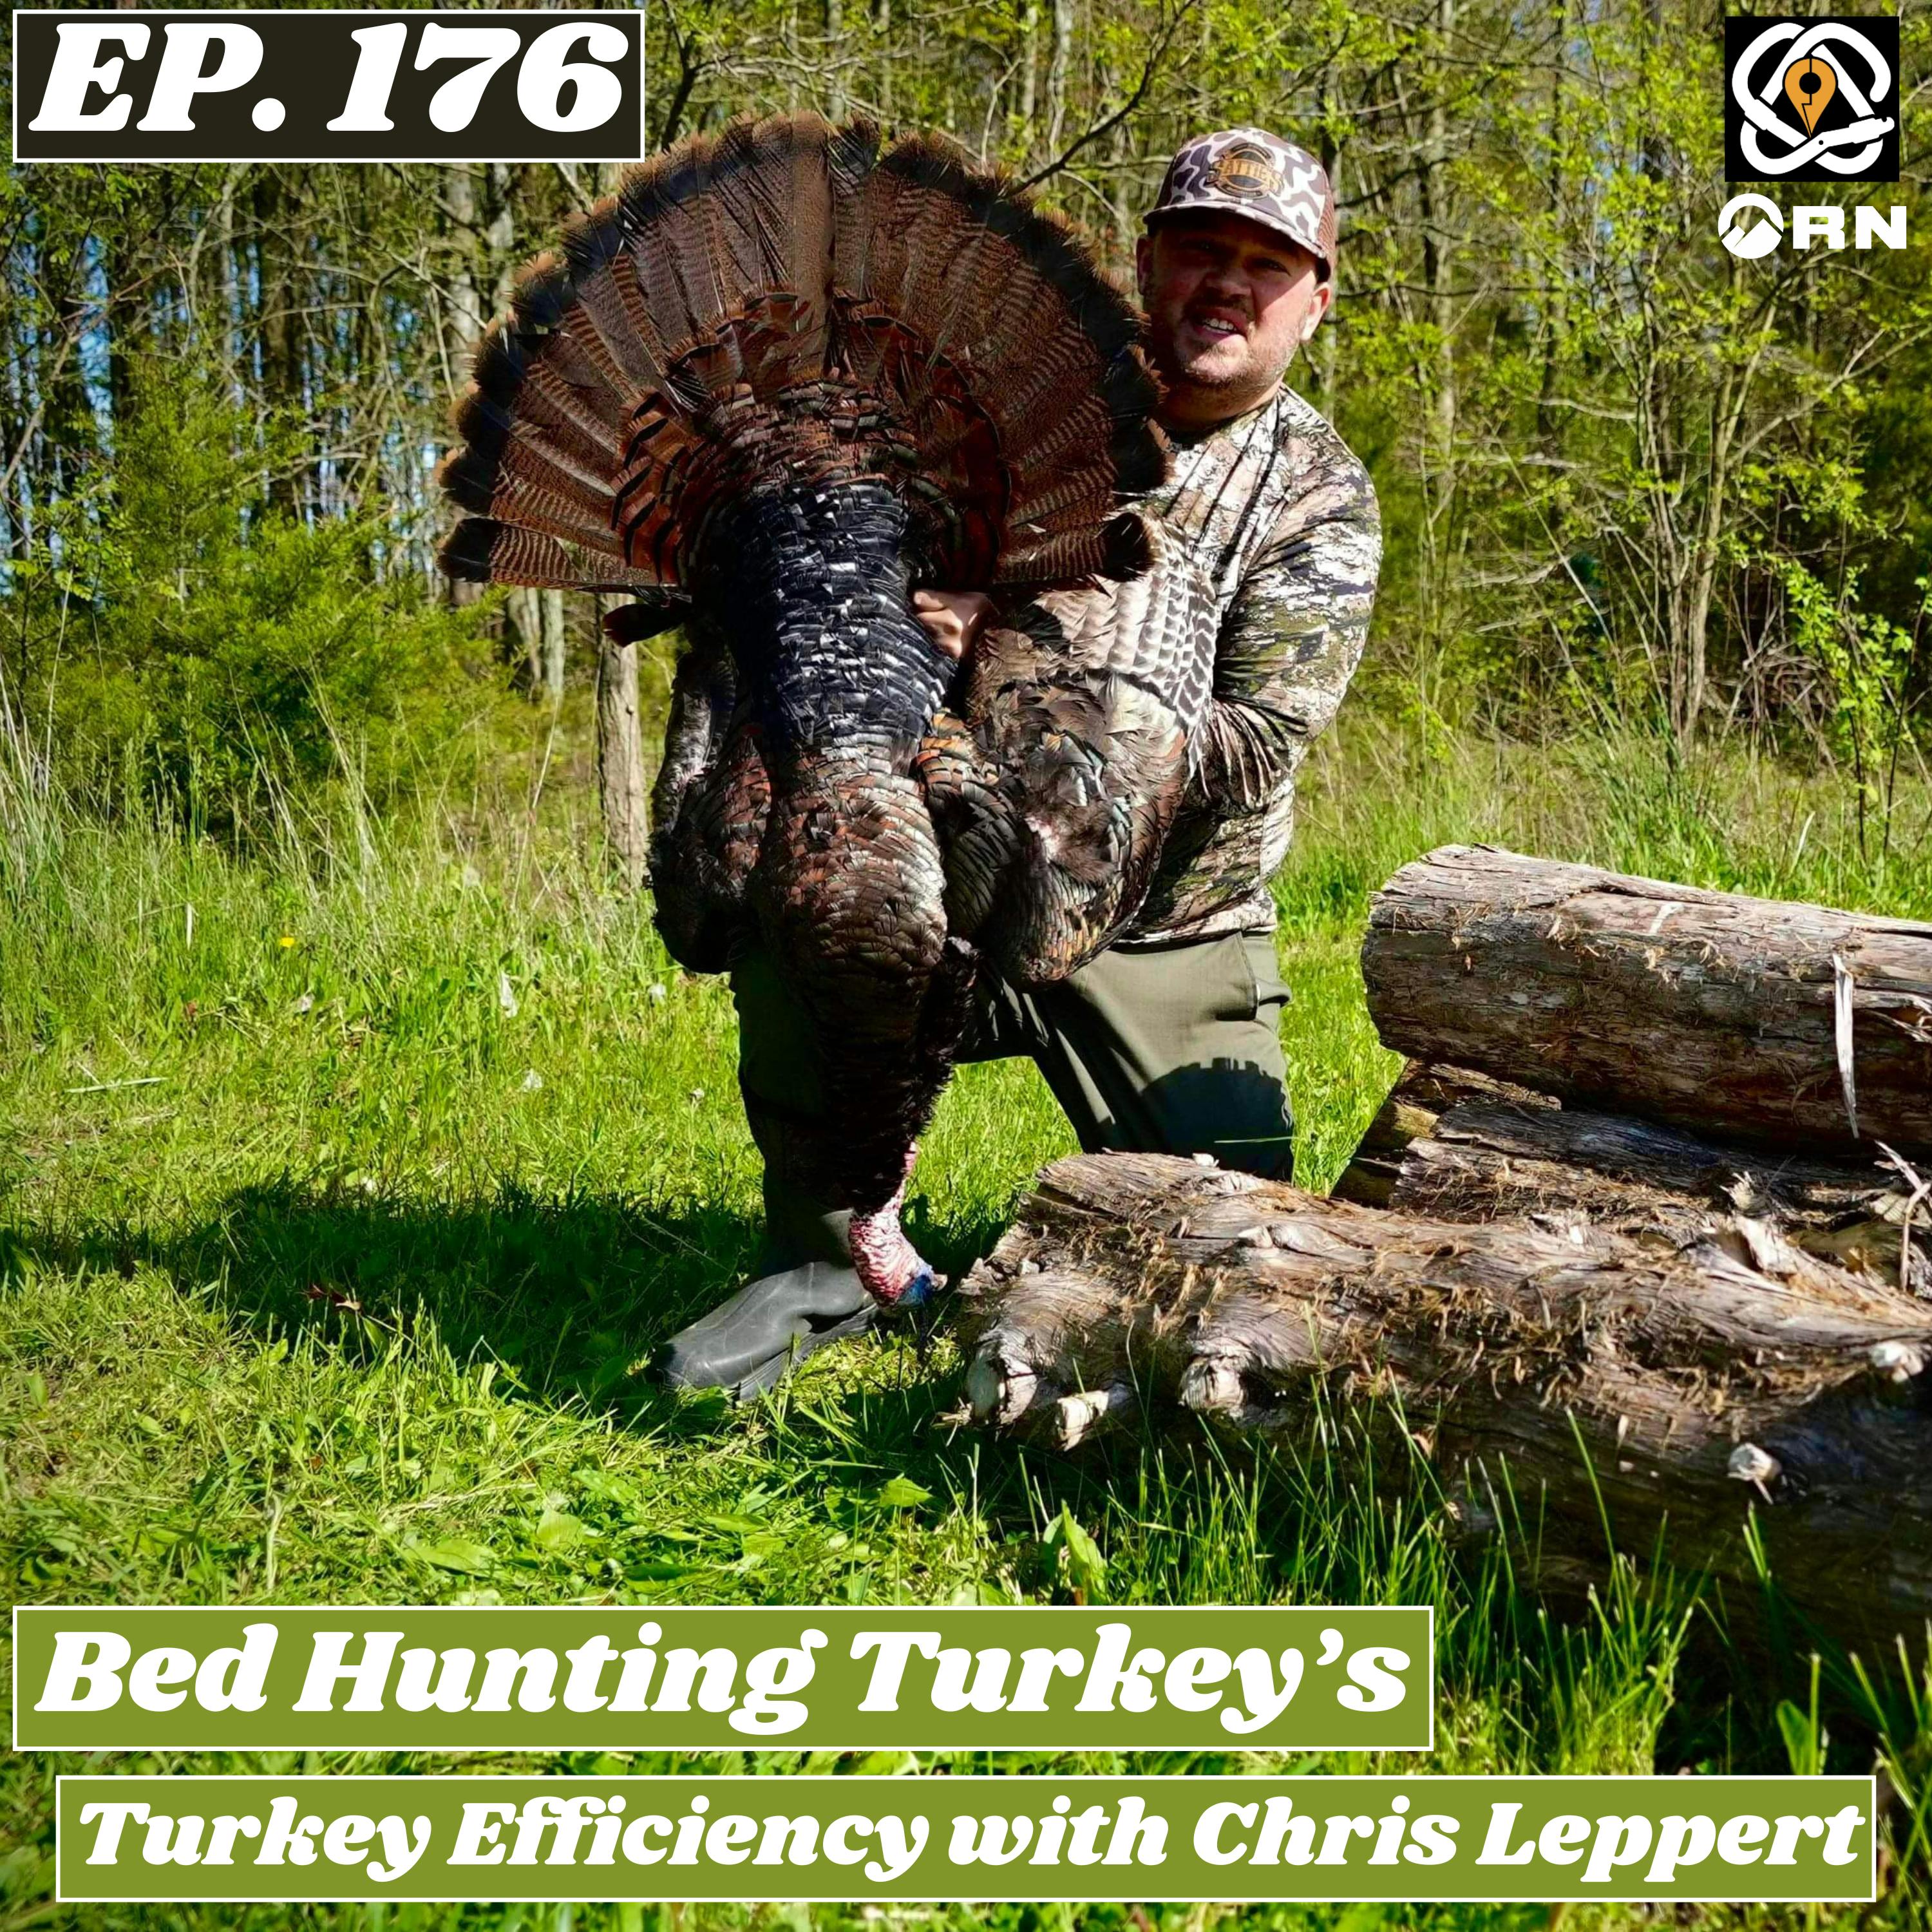 Bed Hunting Turkeys: Turkey Efficiency with Christopher Leppert